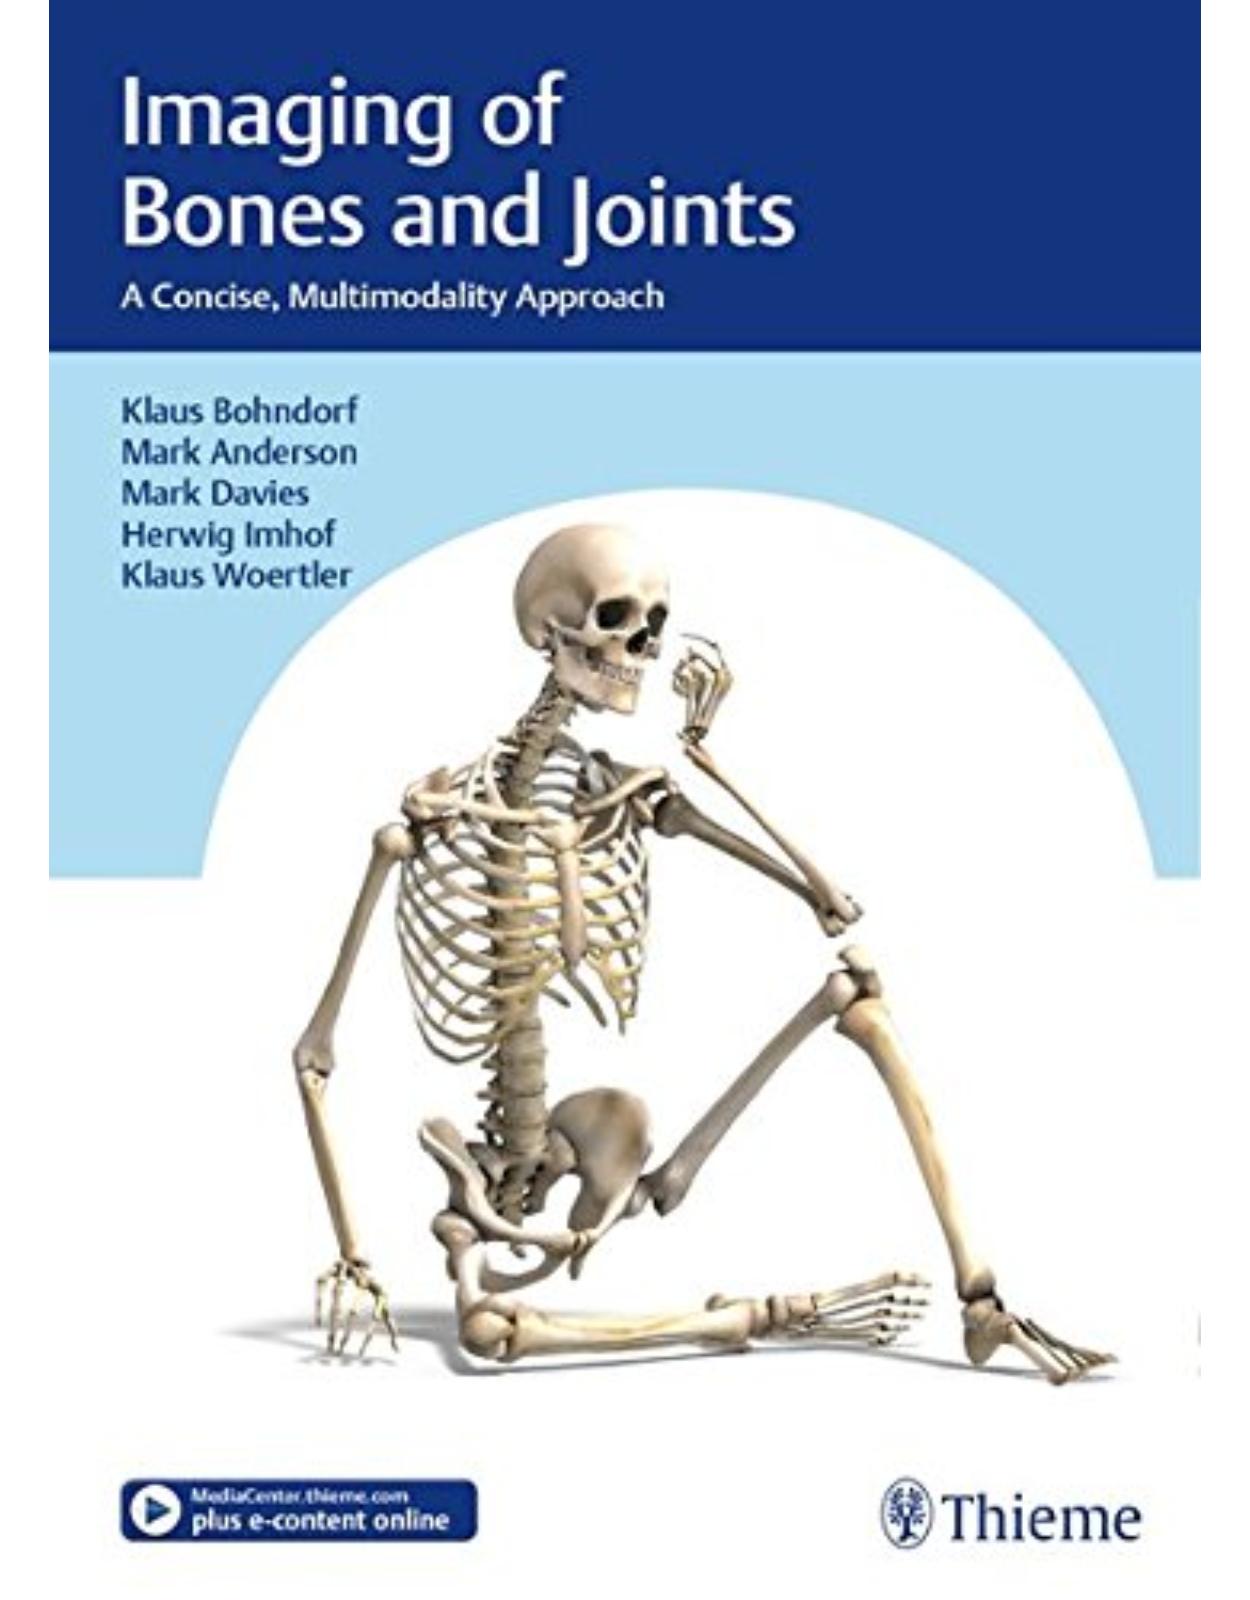  Imaging of Bones and Joints